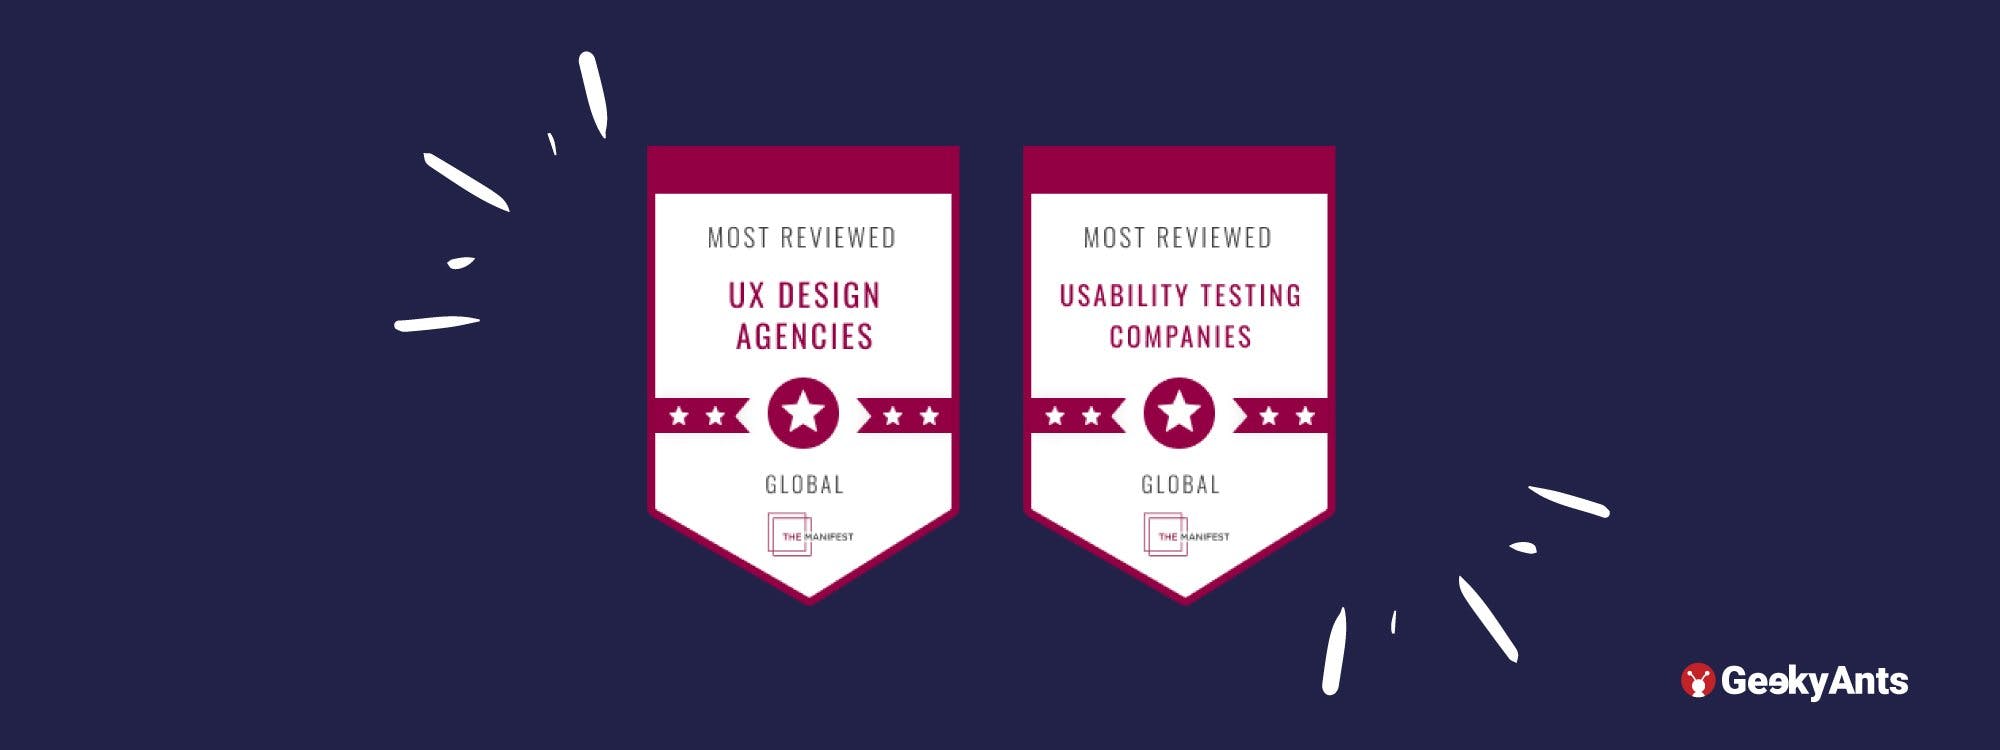 The Manifest Names GeekyAnts As One of The Most Reviewed Usability Testing And UX Design Agencies Globally